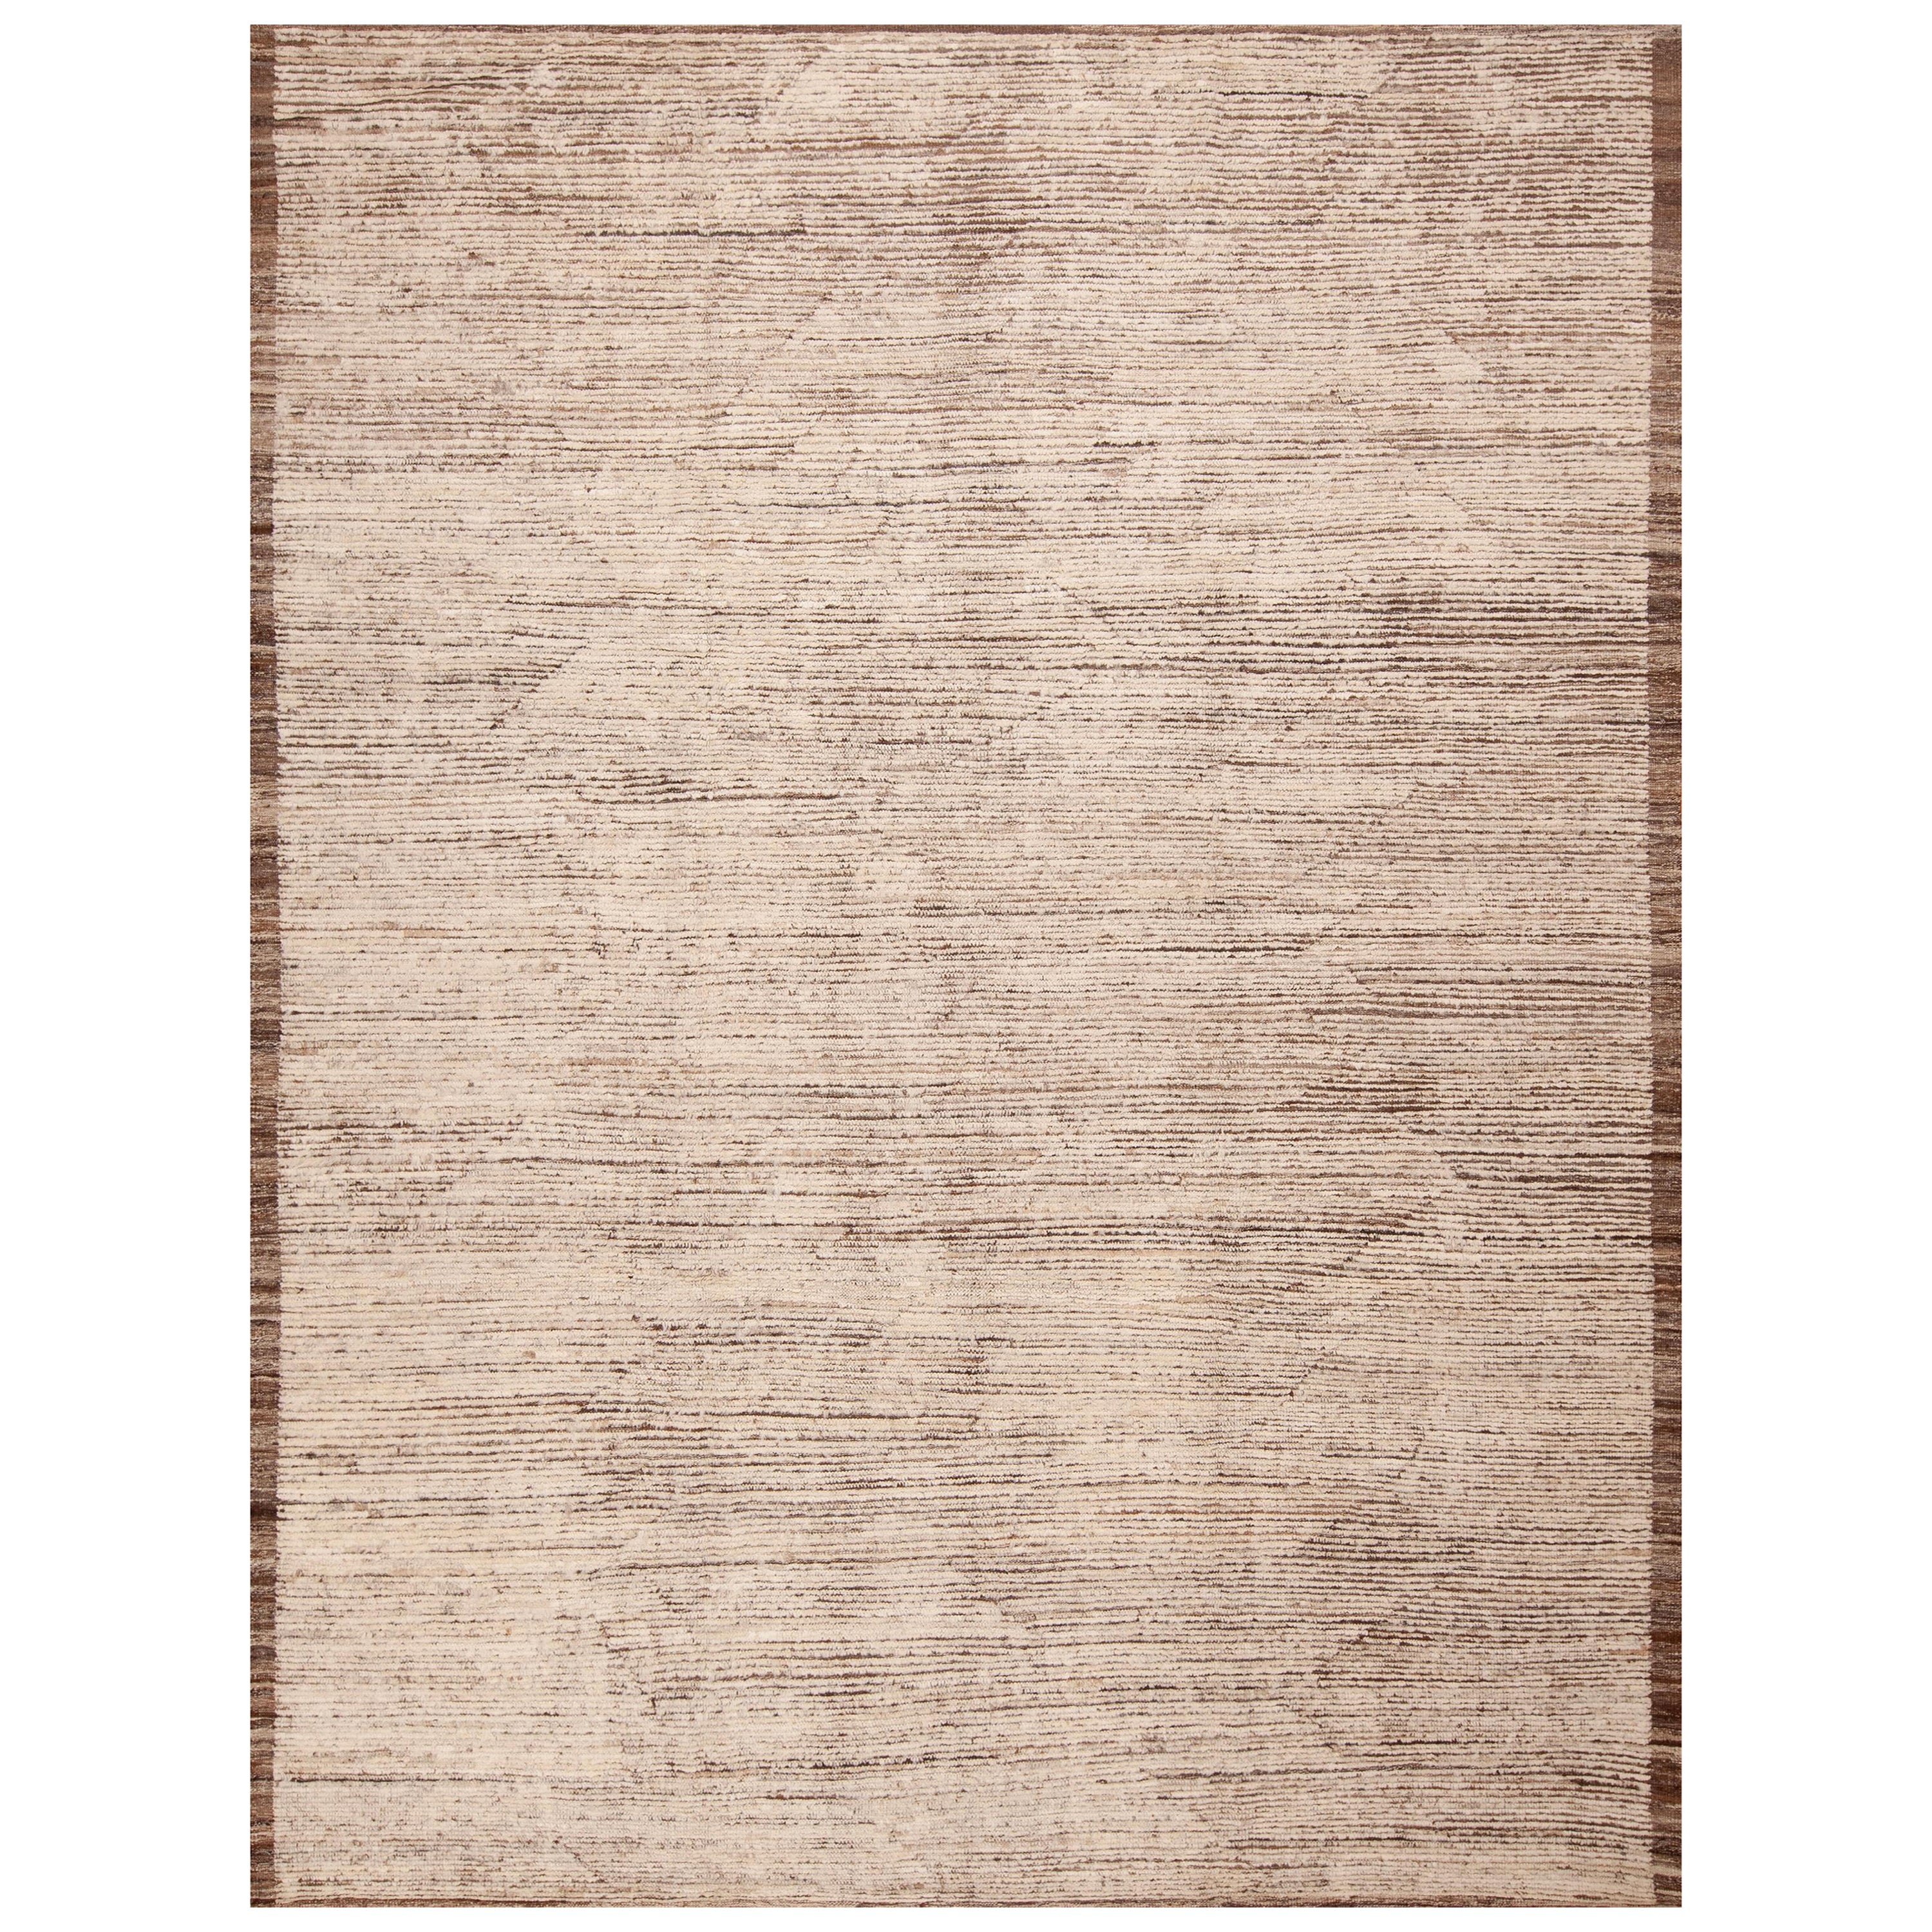 Nazmiyal Collection Abstract Minimalist Modern Room Size Area Rug 9' x 11'9" For Sale